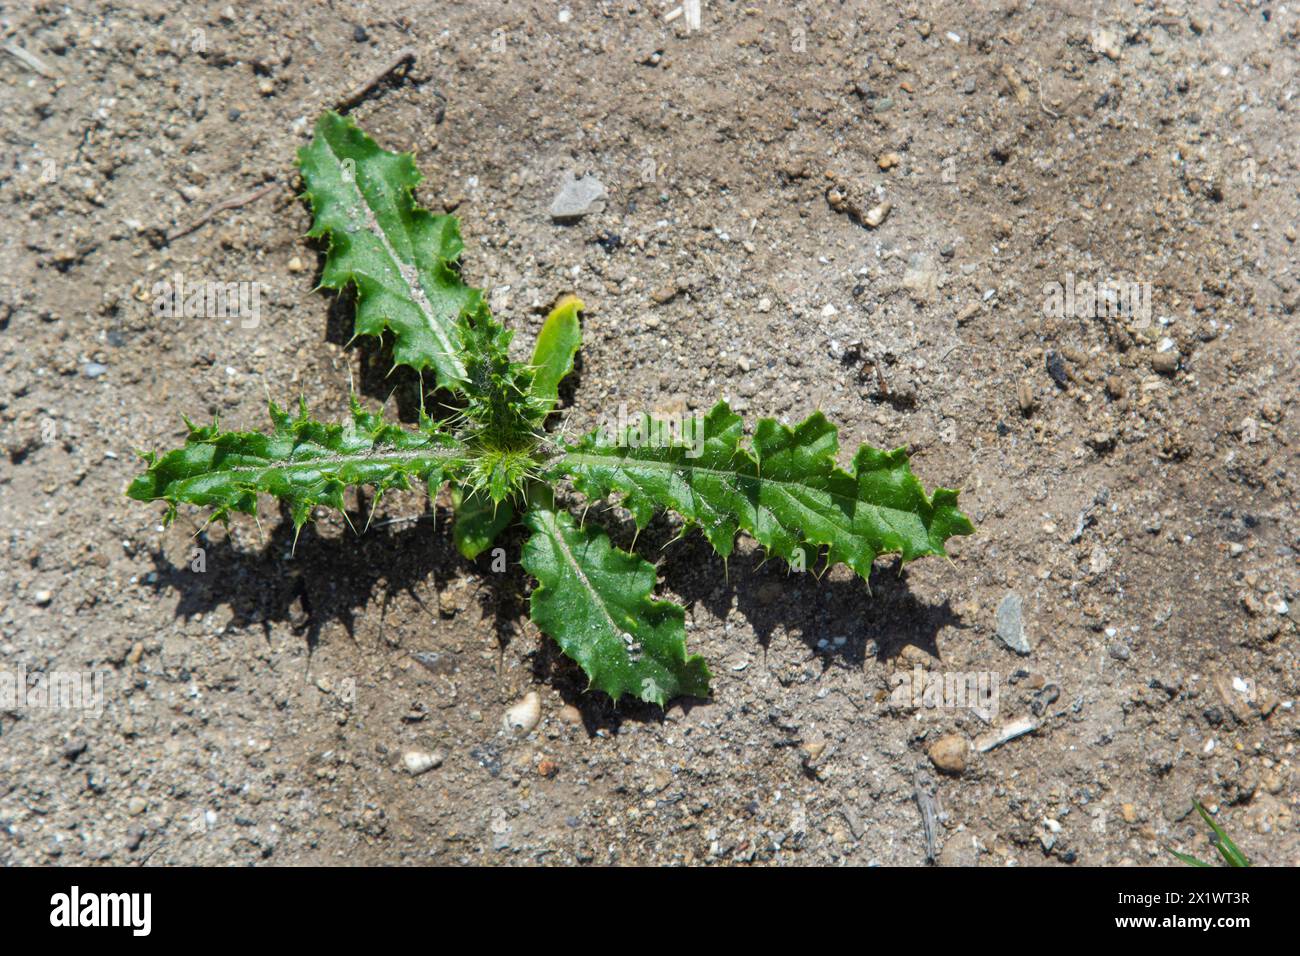 Rosette of young green leaves of Canada thistle, also creeping or field thistle, Cirsium arvense, growing in a flower bed. Invasive weed. Close up on Stock Photo